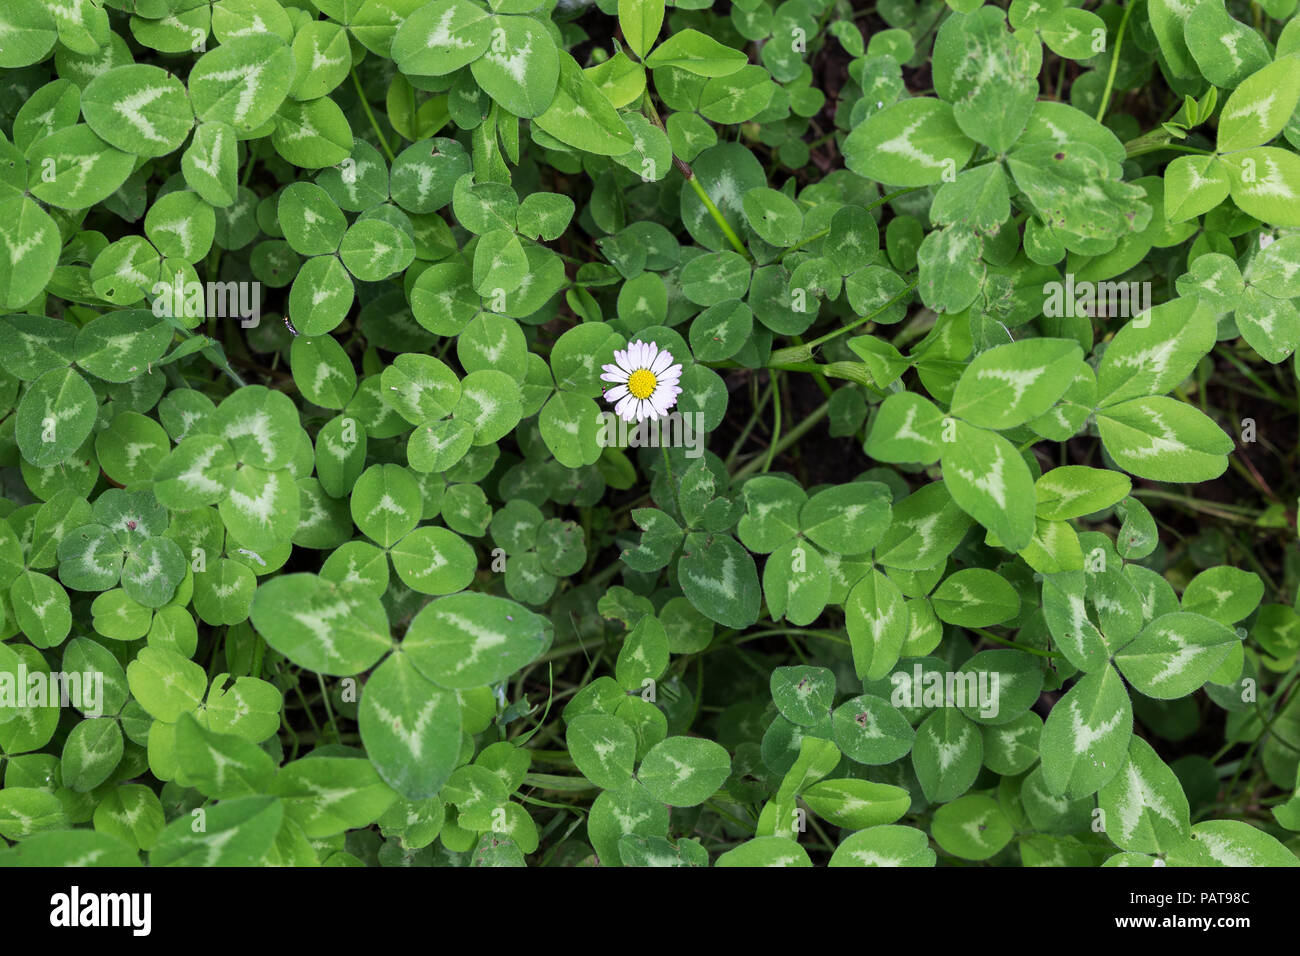 green background of treboles with a solitary daisy to be able to put text Stock Photo